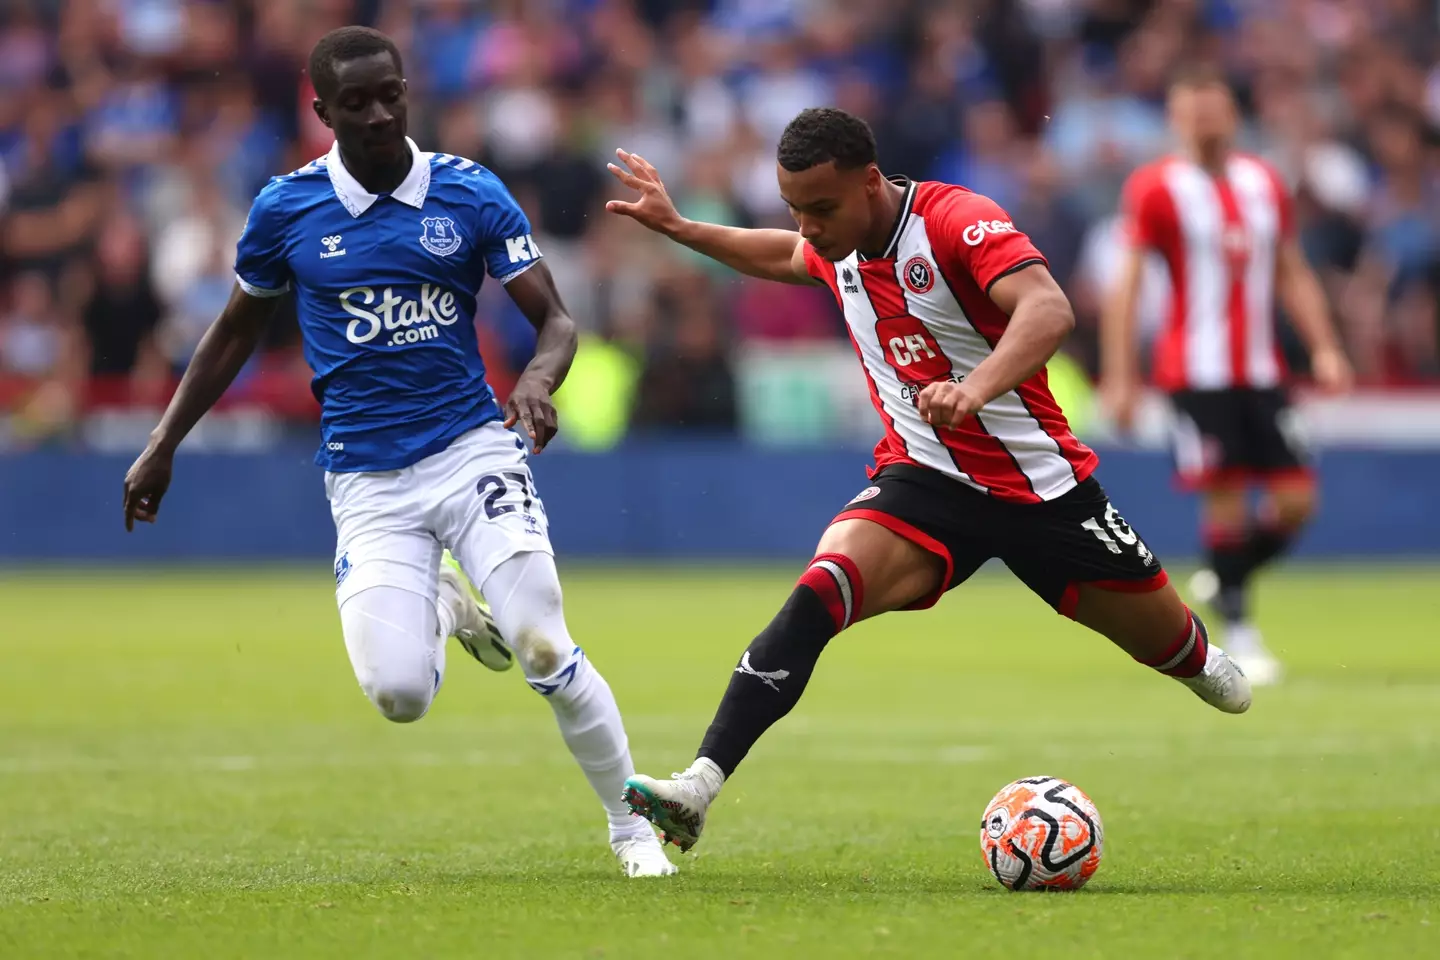 Everton and Sheffield United played out a 2-2 draw in September. (Image